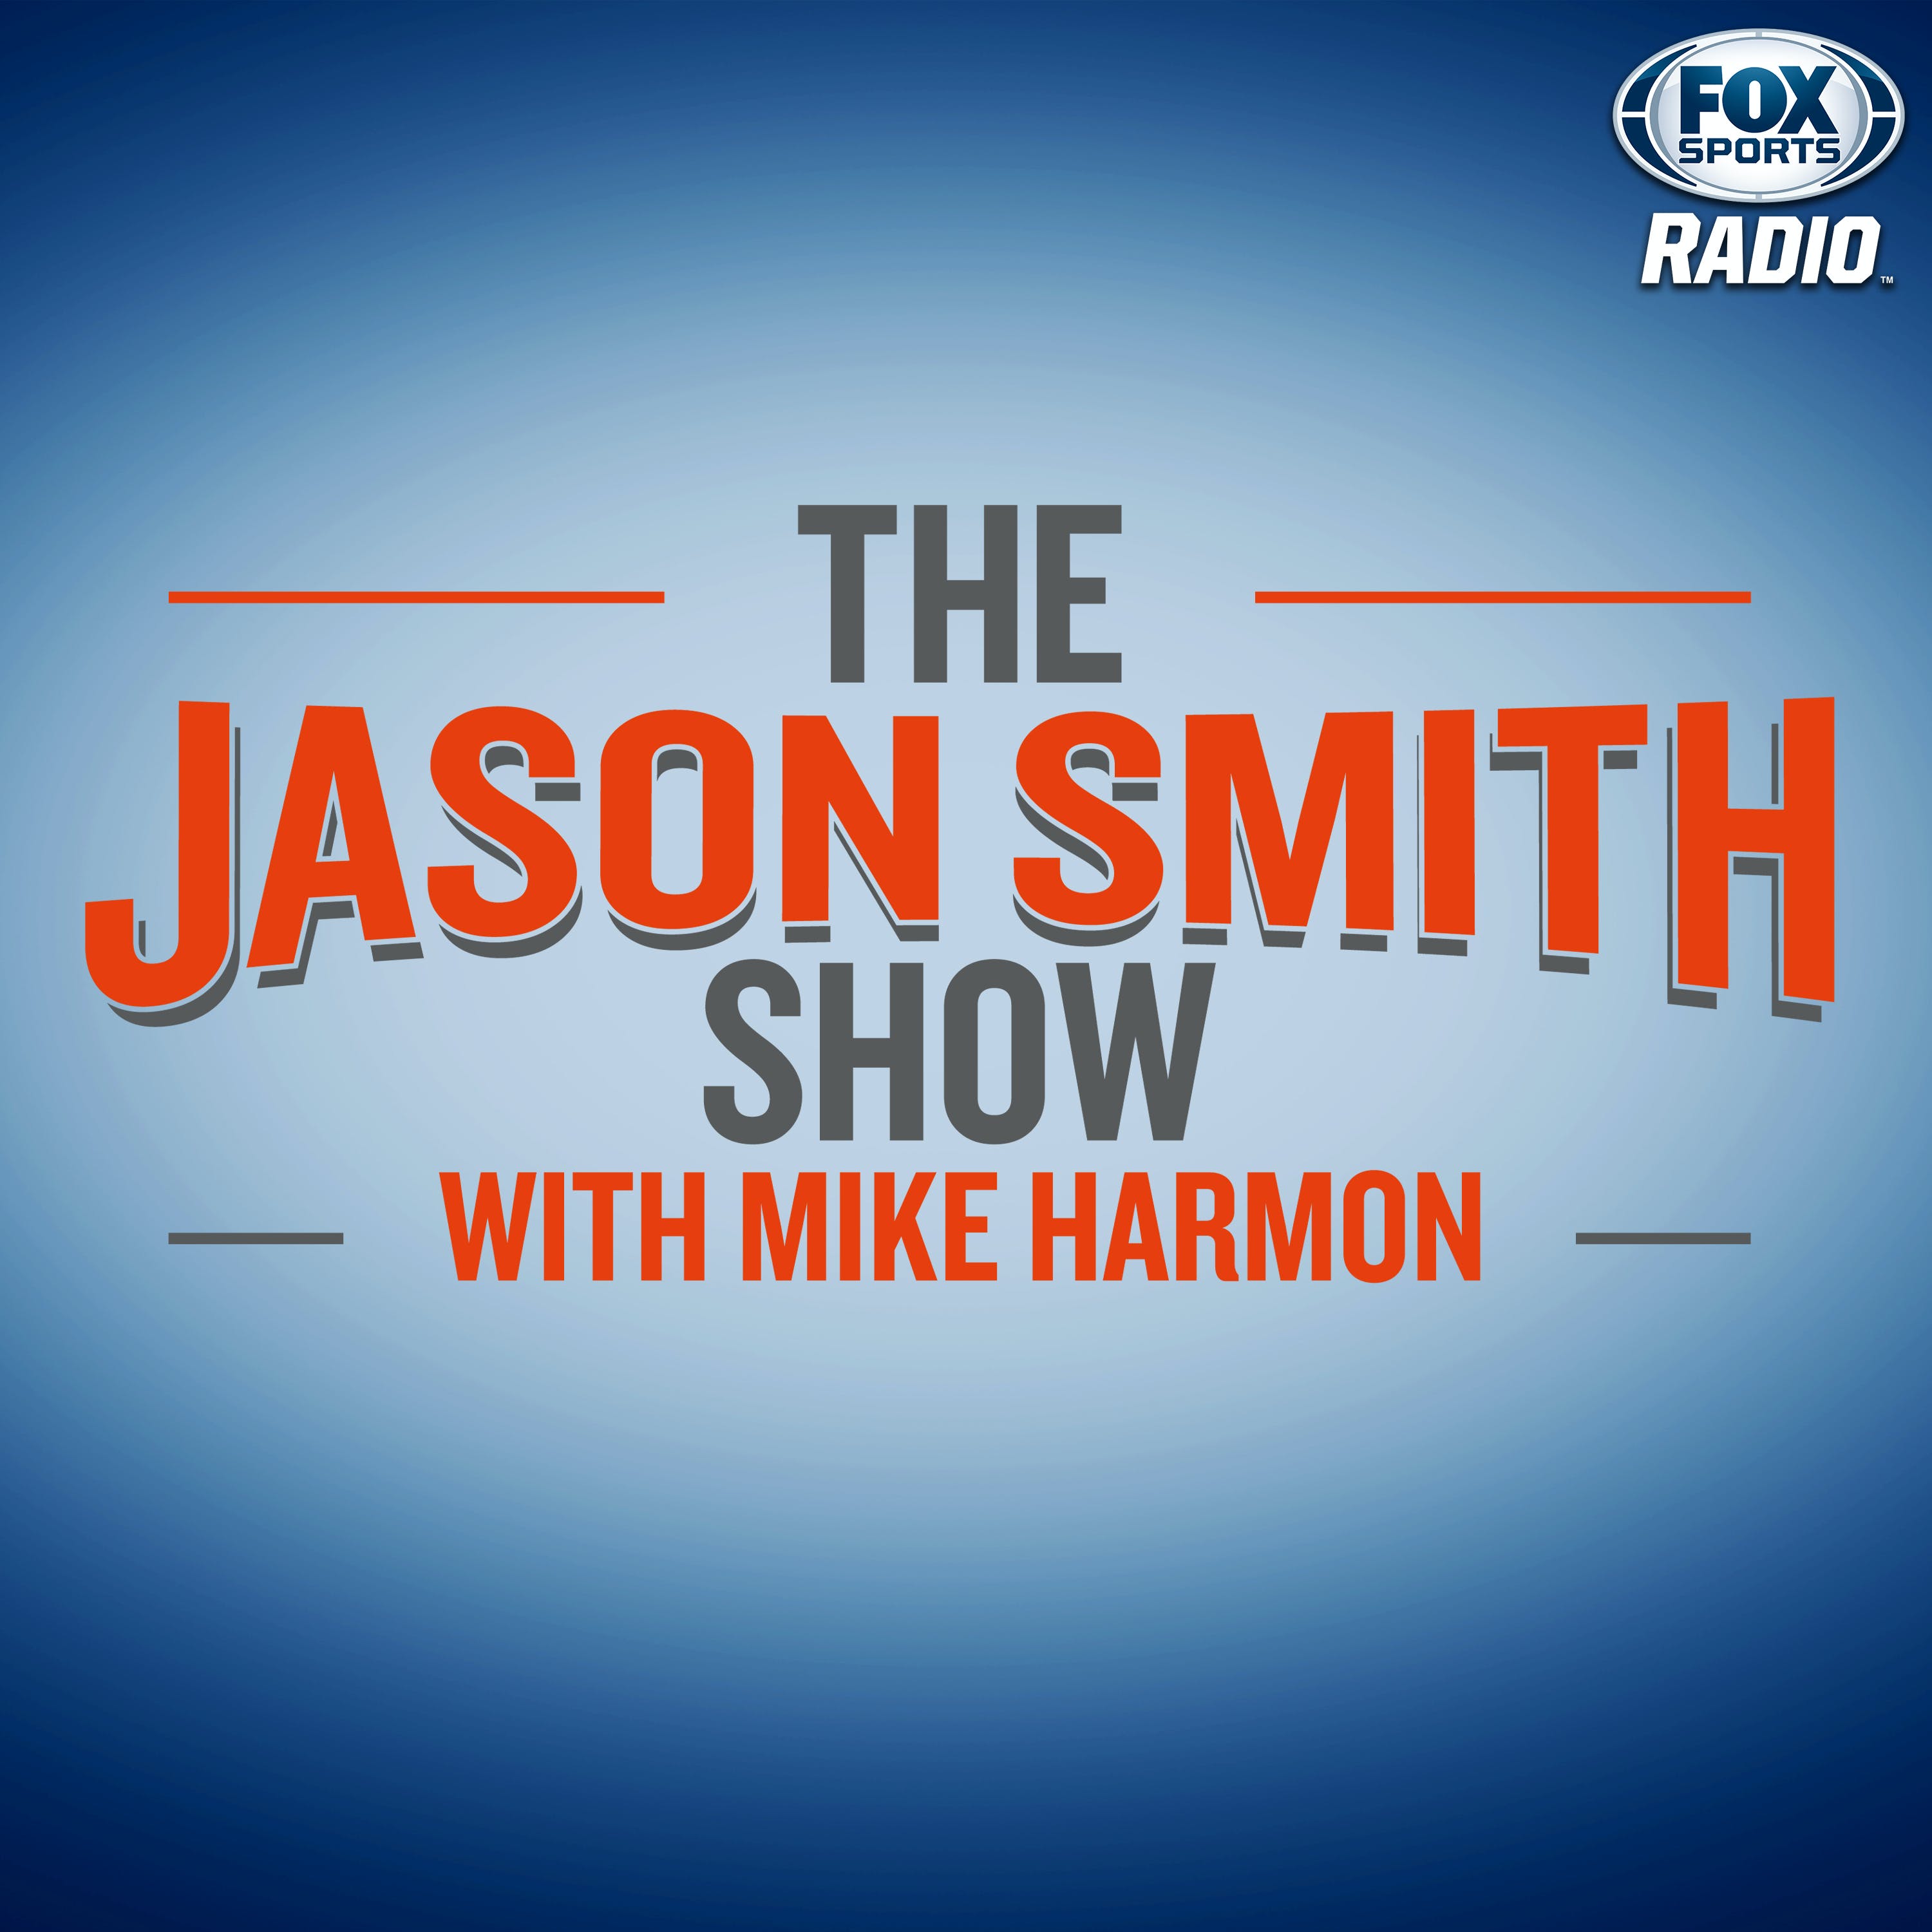 07/23/2021 - Best Of The Jason Smith Show with Mike Harmon